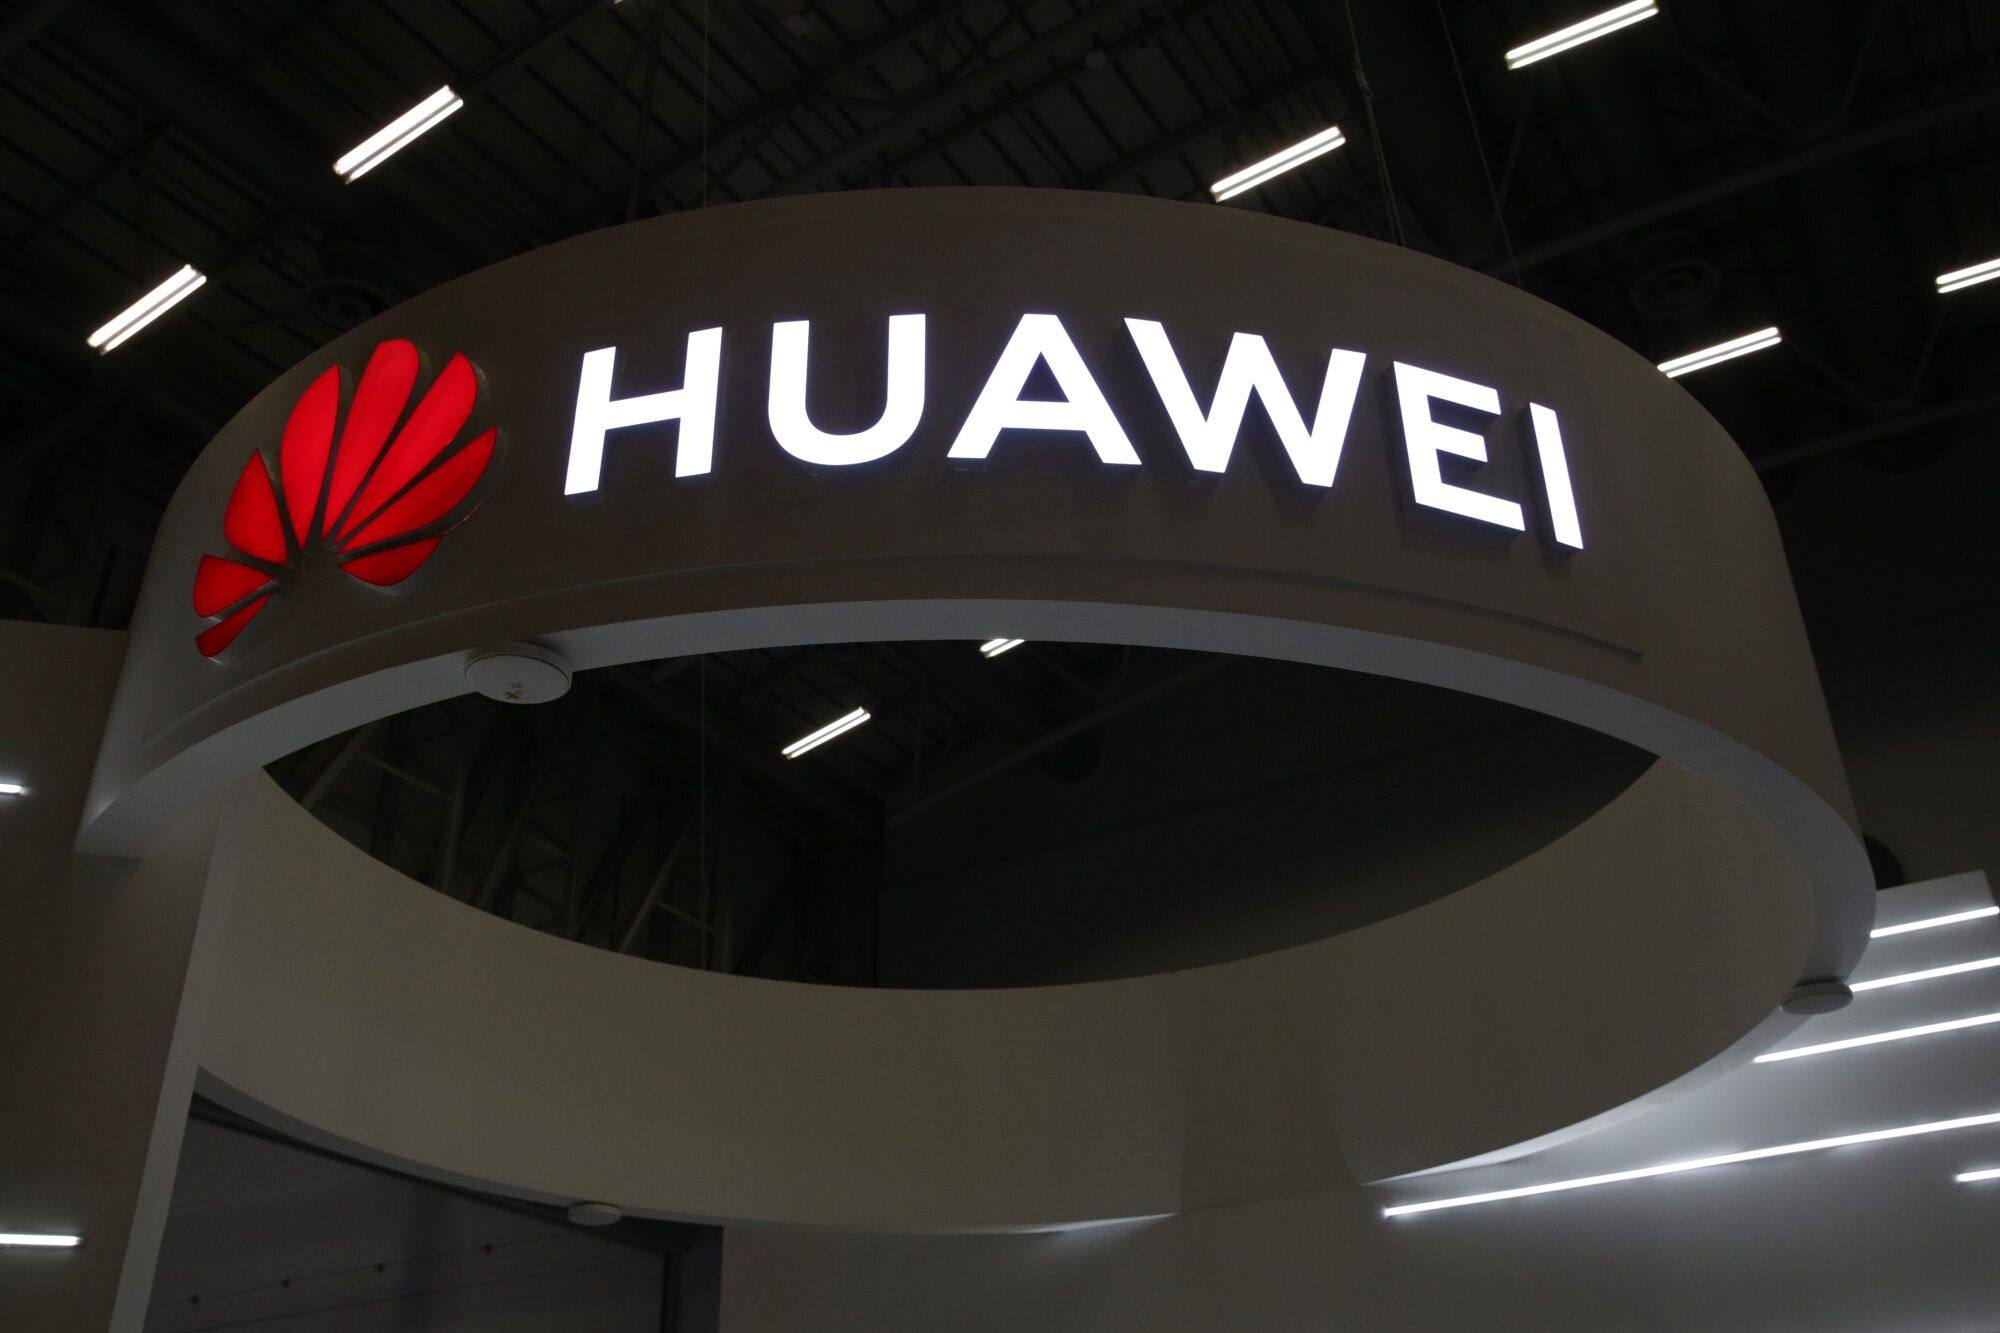 Huawei said its new patent cross-licensing agreement with Ericsson will cover patents essential to various standards for 3G, 4G and 5G technologies globally. Photo: Bloomberg